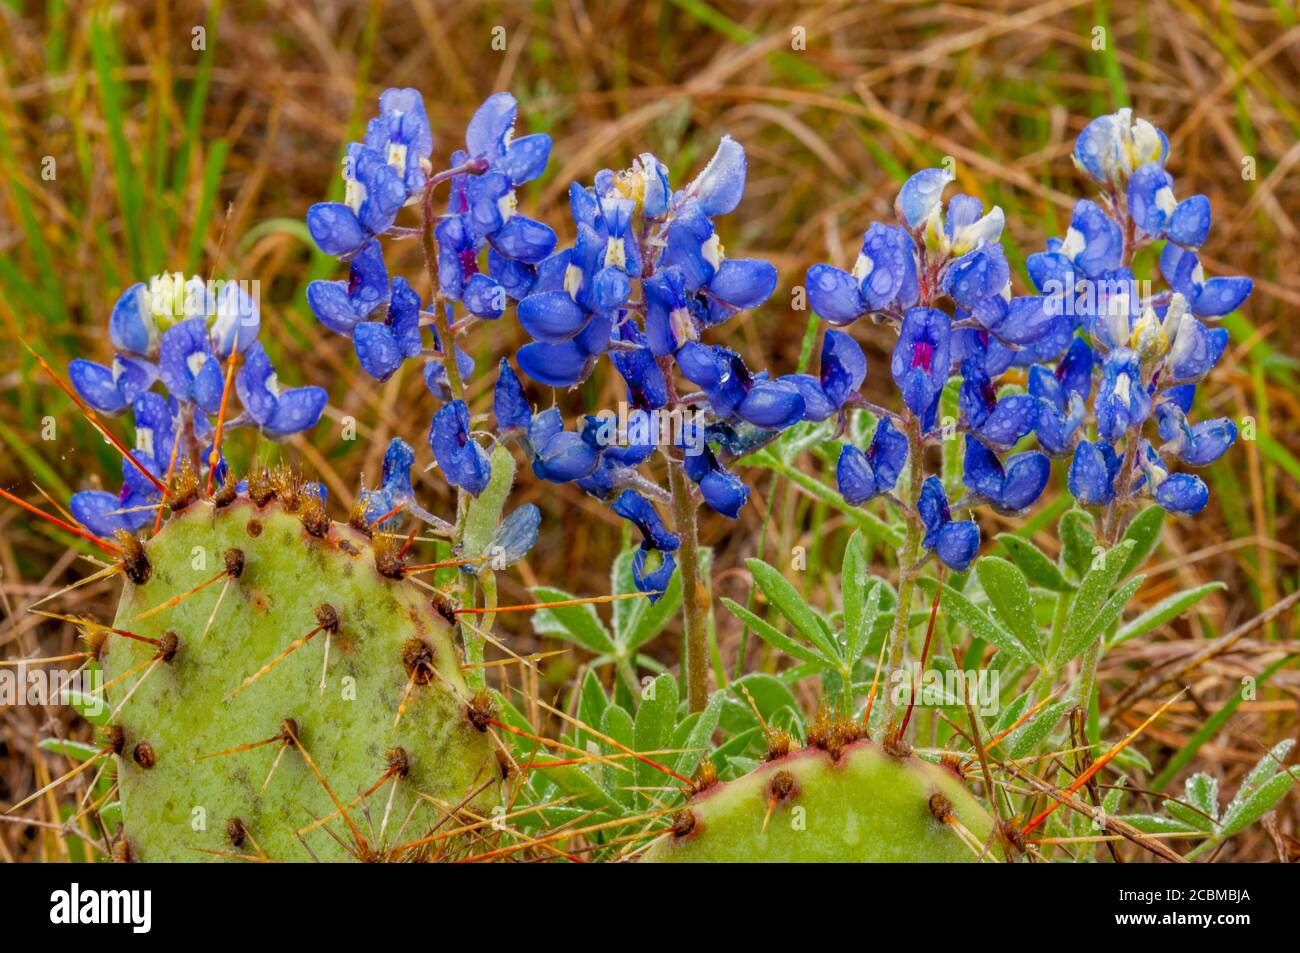 Bluebonnets (Lupinus texensis) and Opuntia, commonly called prickly pear, cacti in the Hill Country of Texas near Hunt, USA. Stock Photo